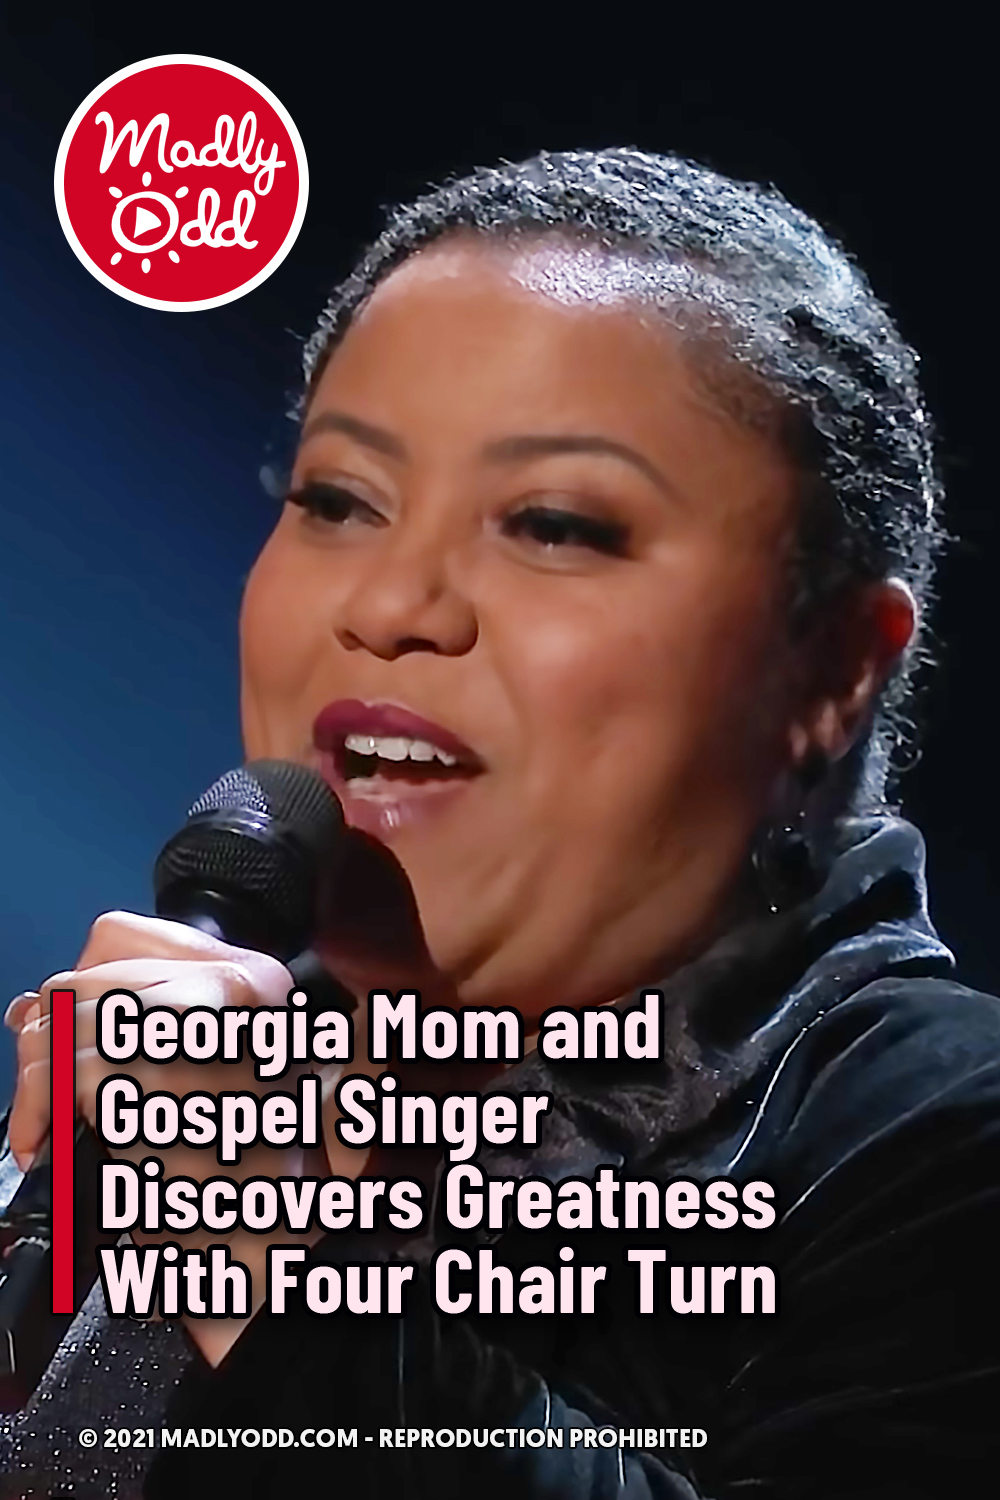 Georgia Mom and Gospel Singer Discovers Greatness With Four Chair Turn